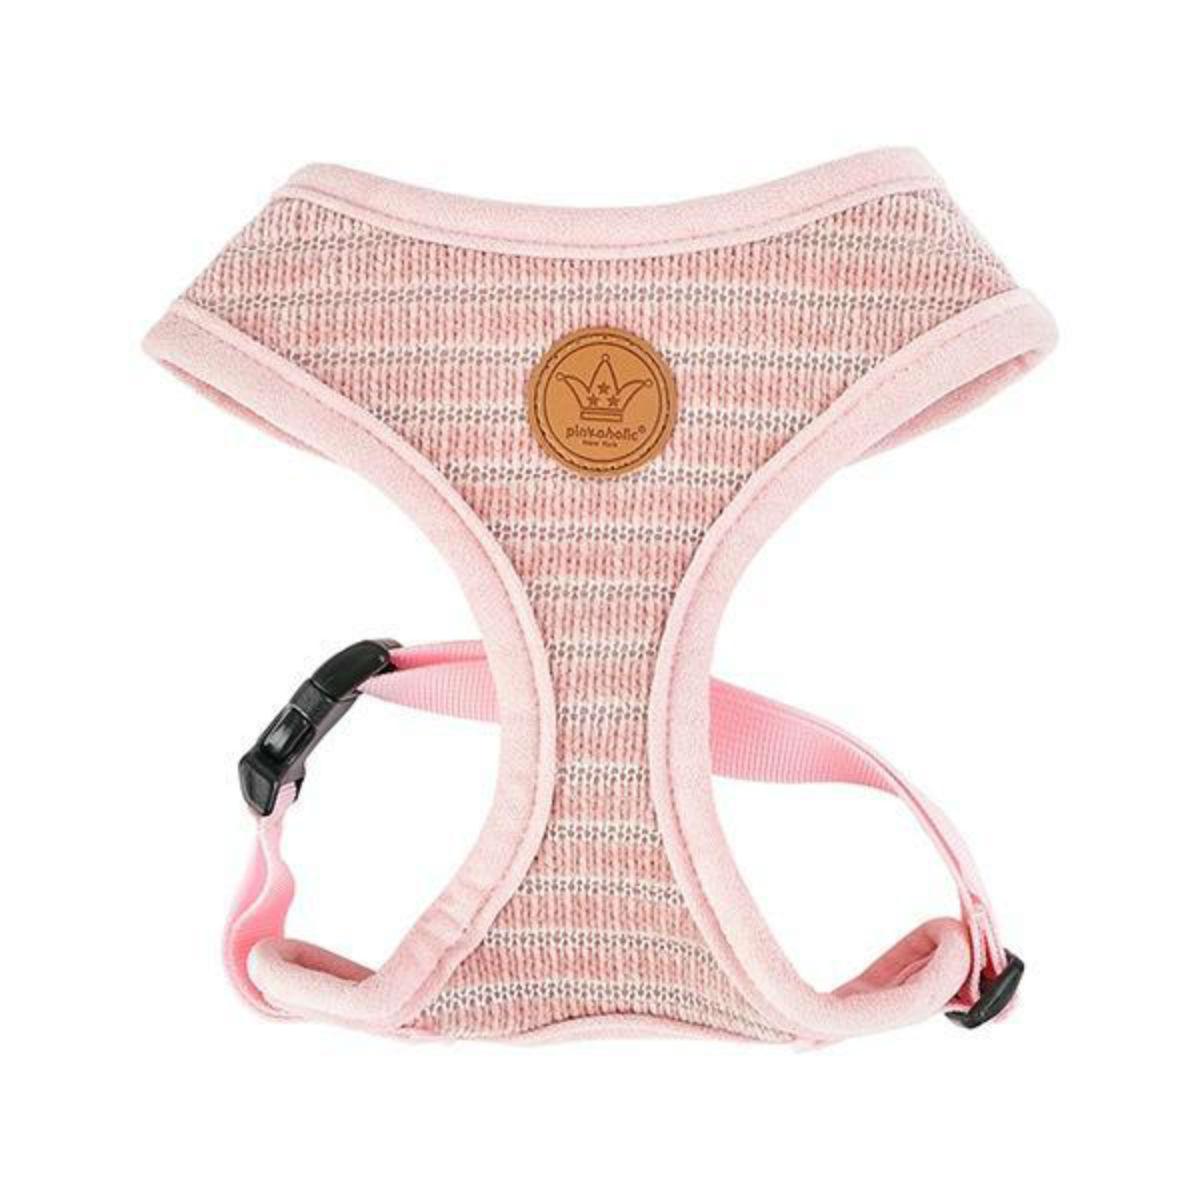 Elicia Basic Style Dog Harness by Pinkaholic - Indian Pink